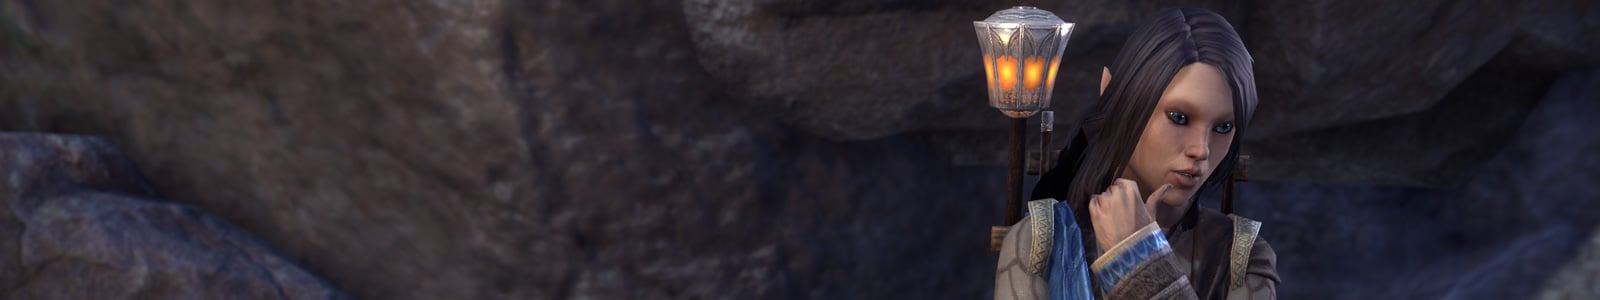 Deconstruct Assistant Guide - ESO header